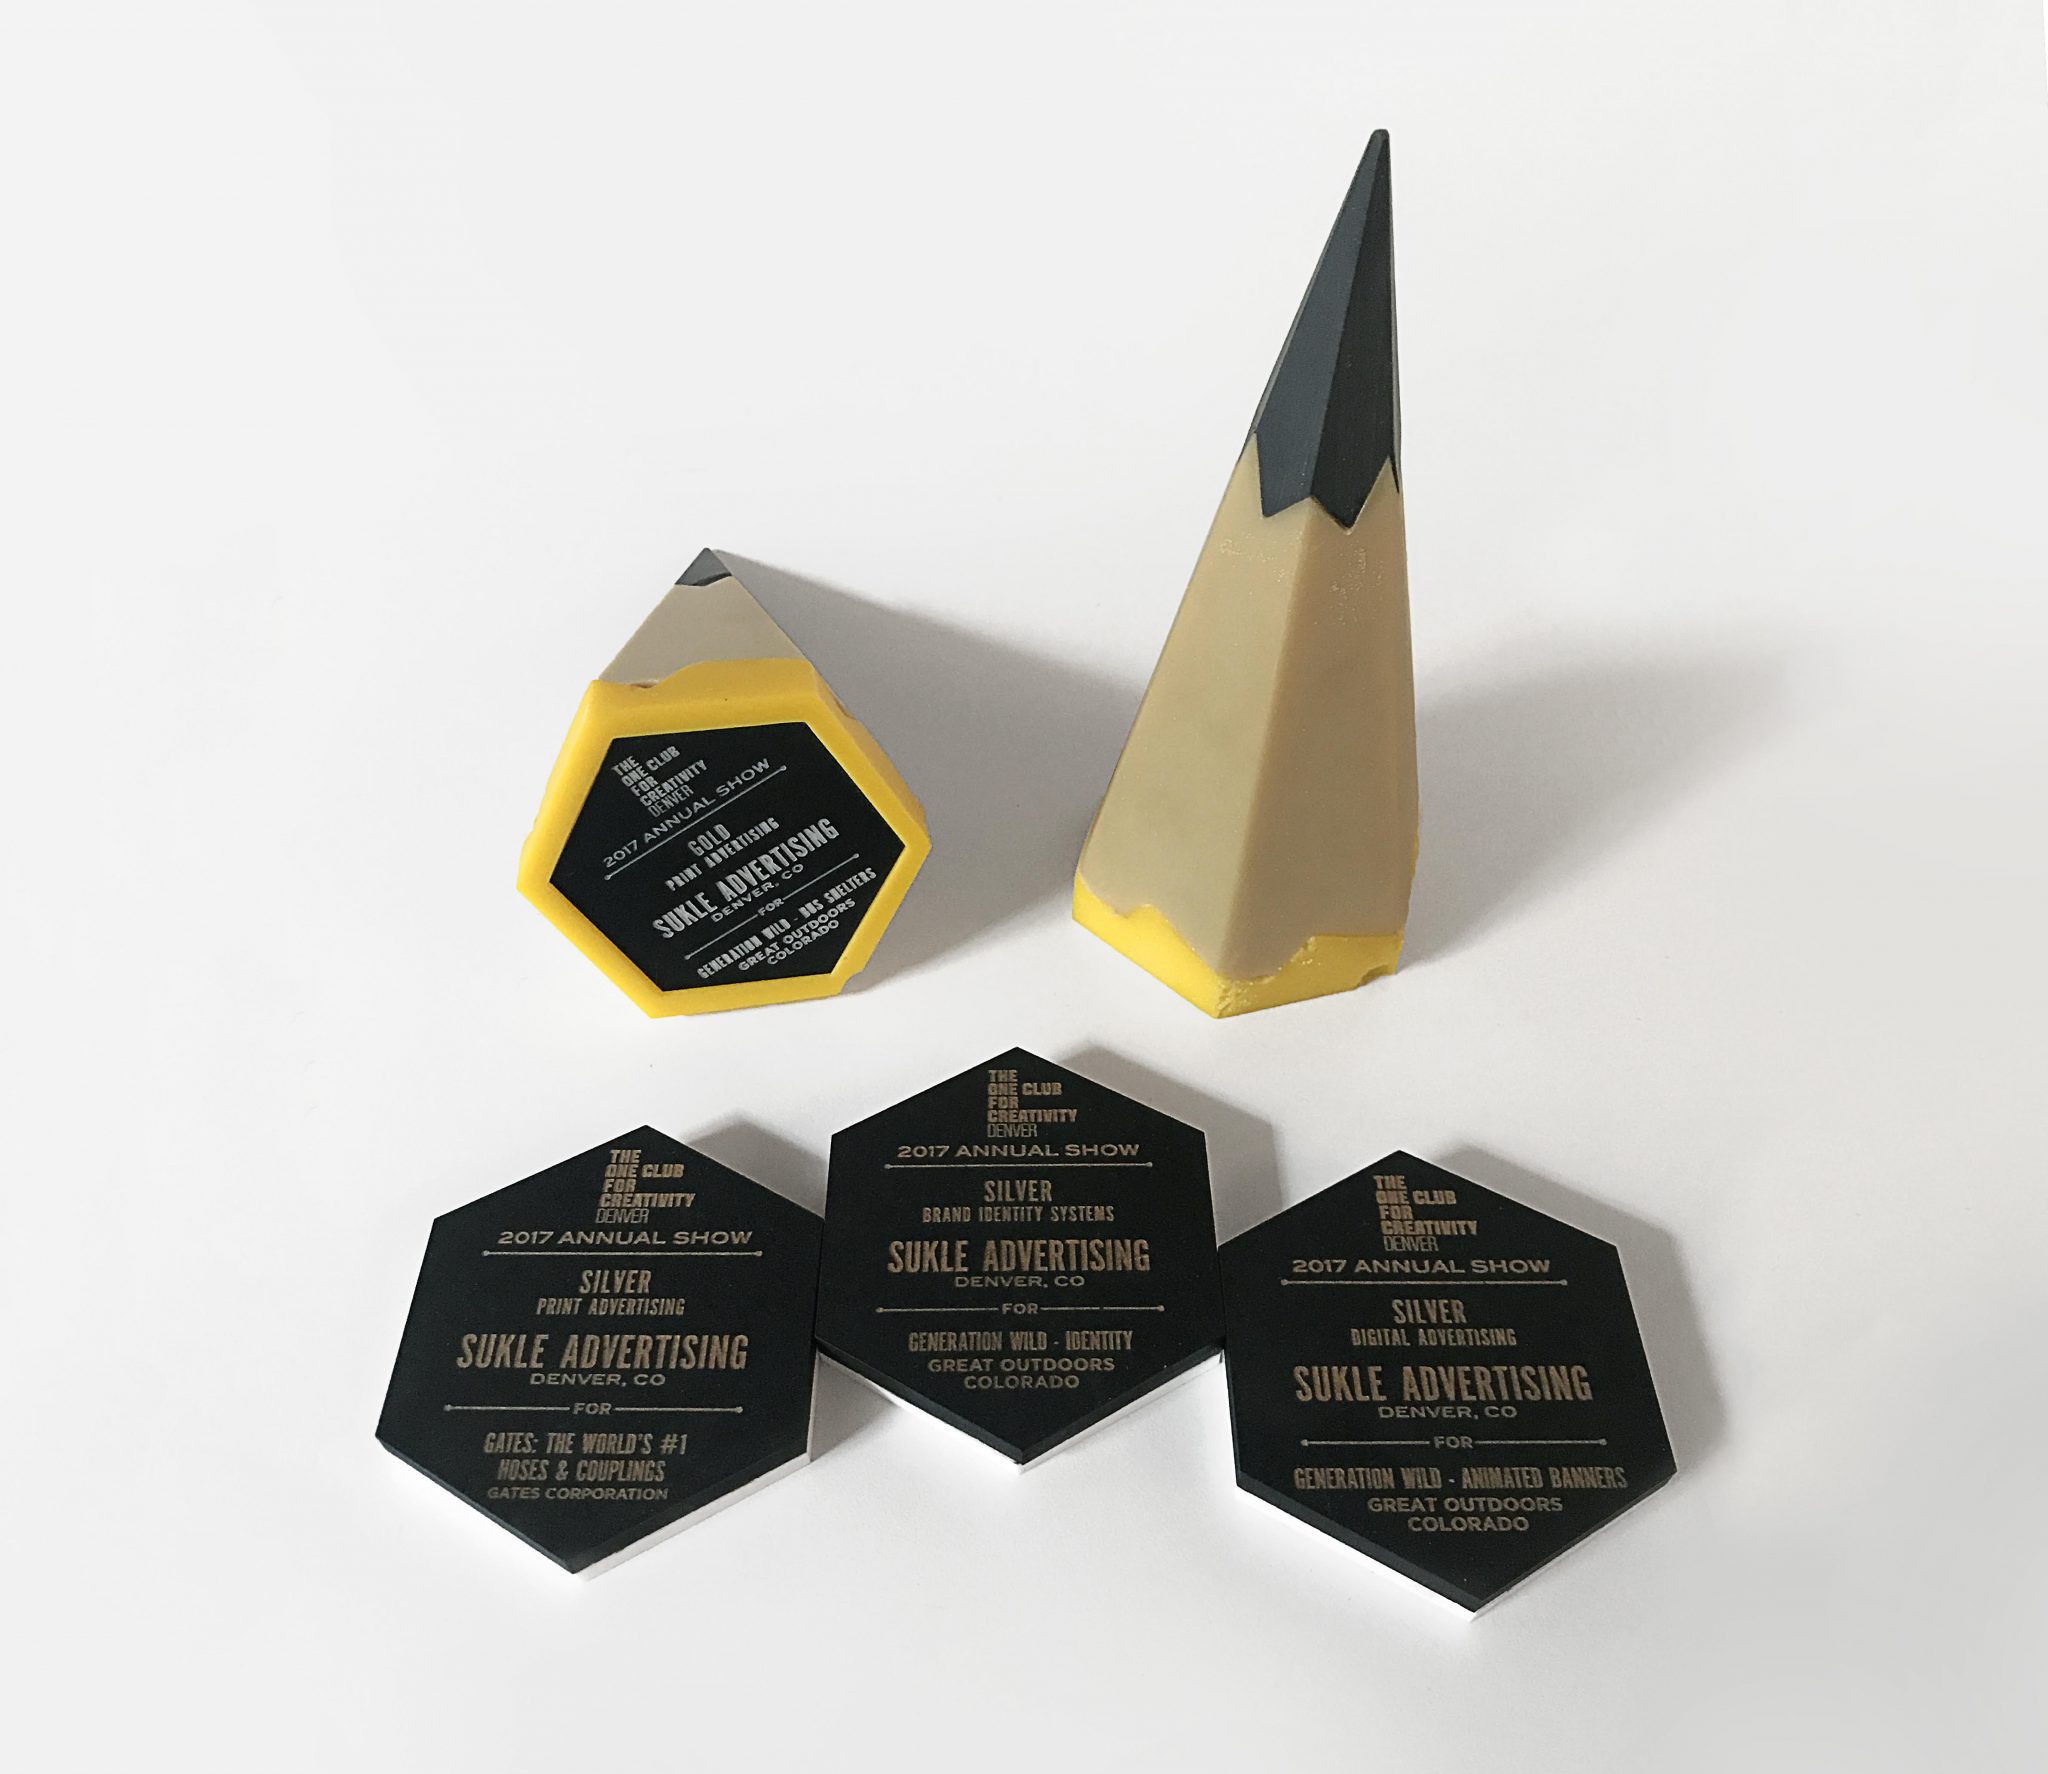 Sukle went home with two Gold and three Silver awards at the ADCD Annual Show